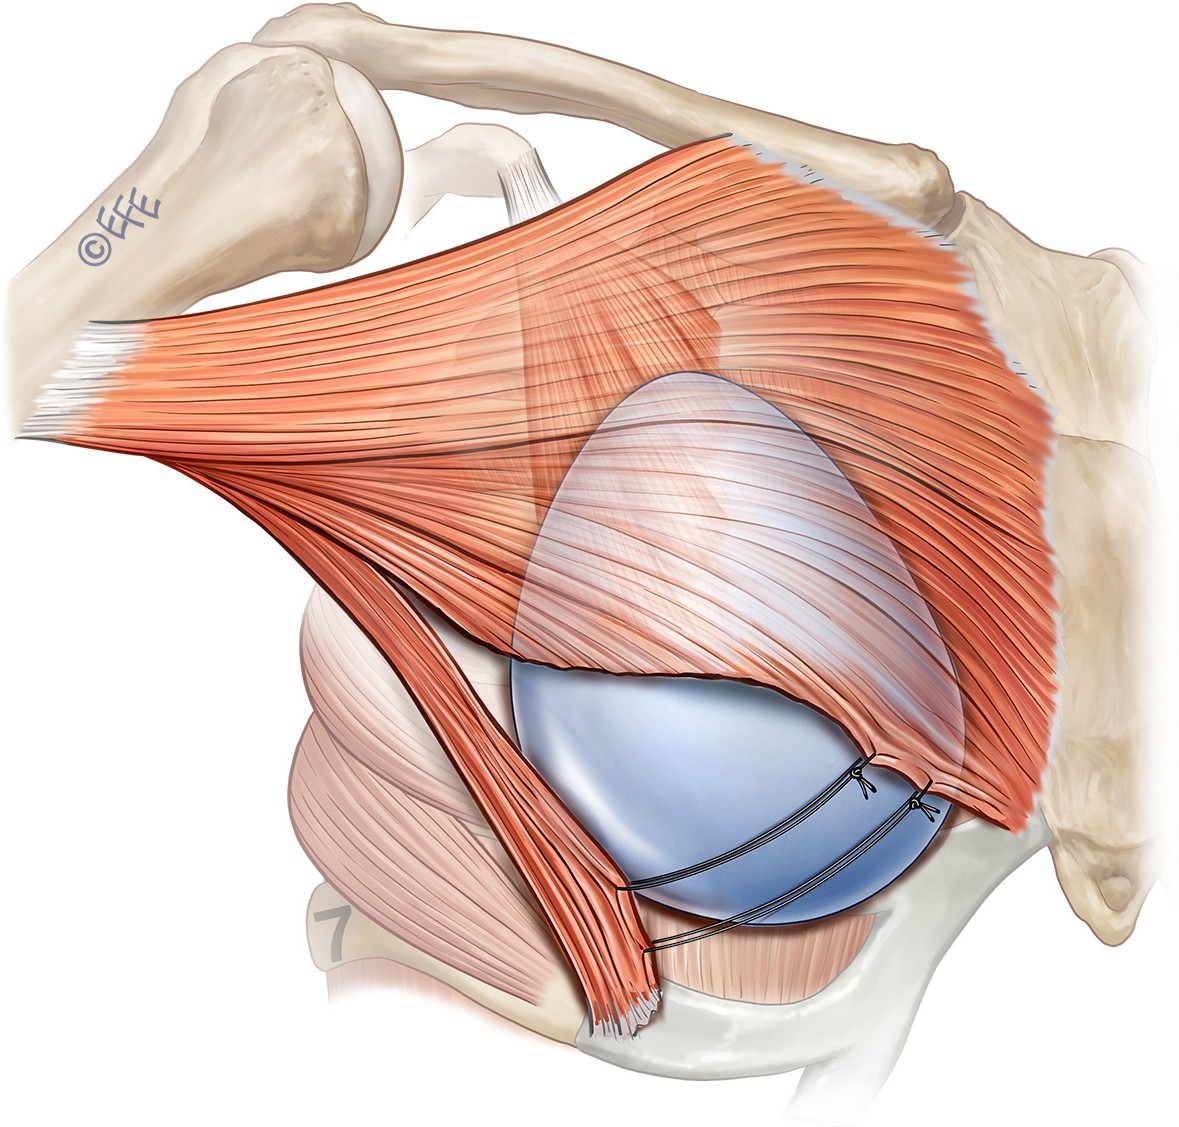 How to perform breast augmentation using a composite myofascial